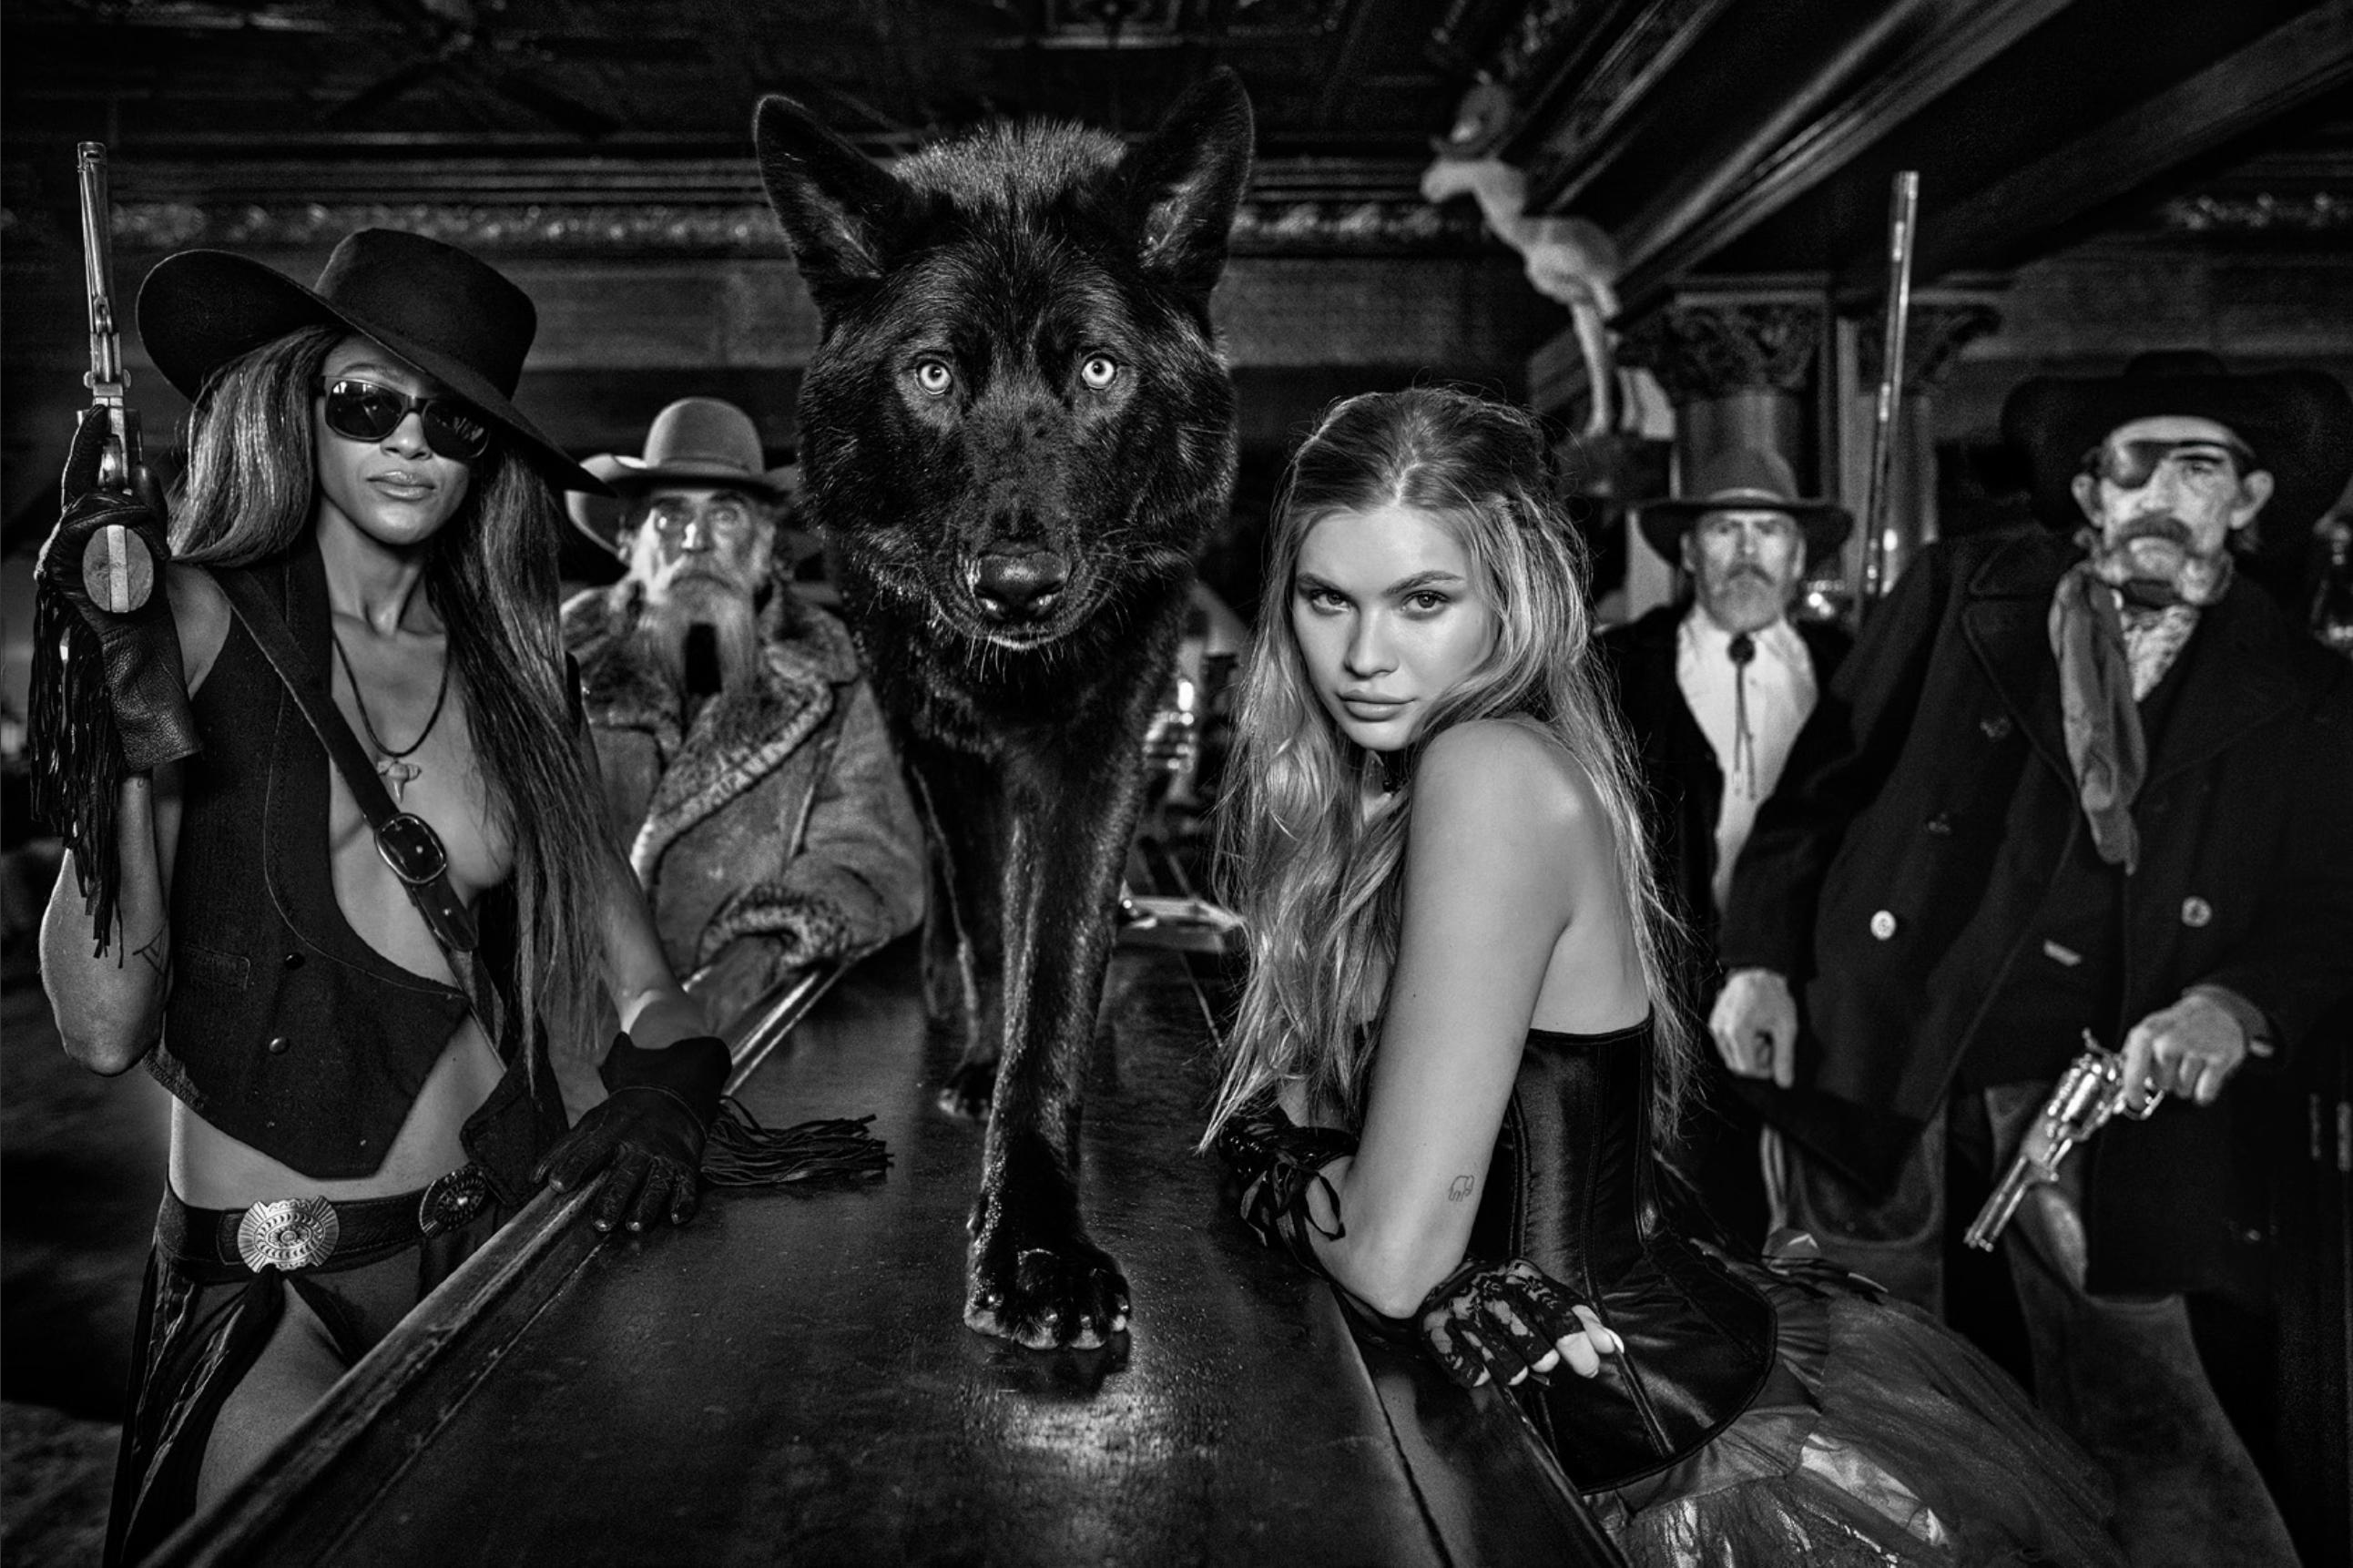 David Yarrow Black and White Photograph - The Residents